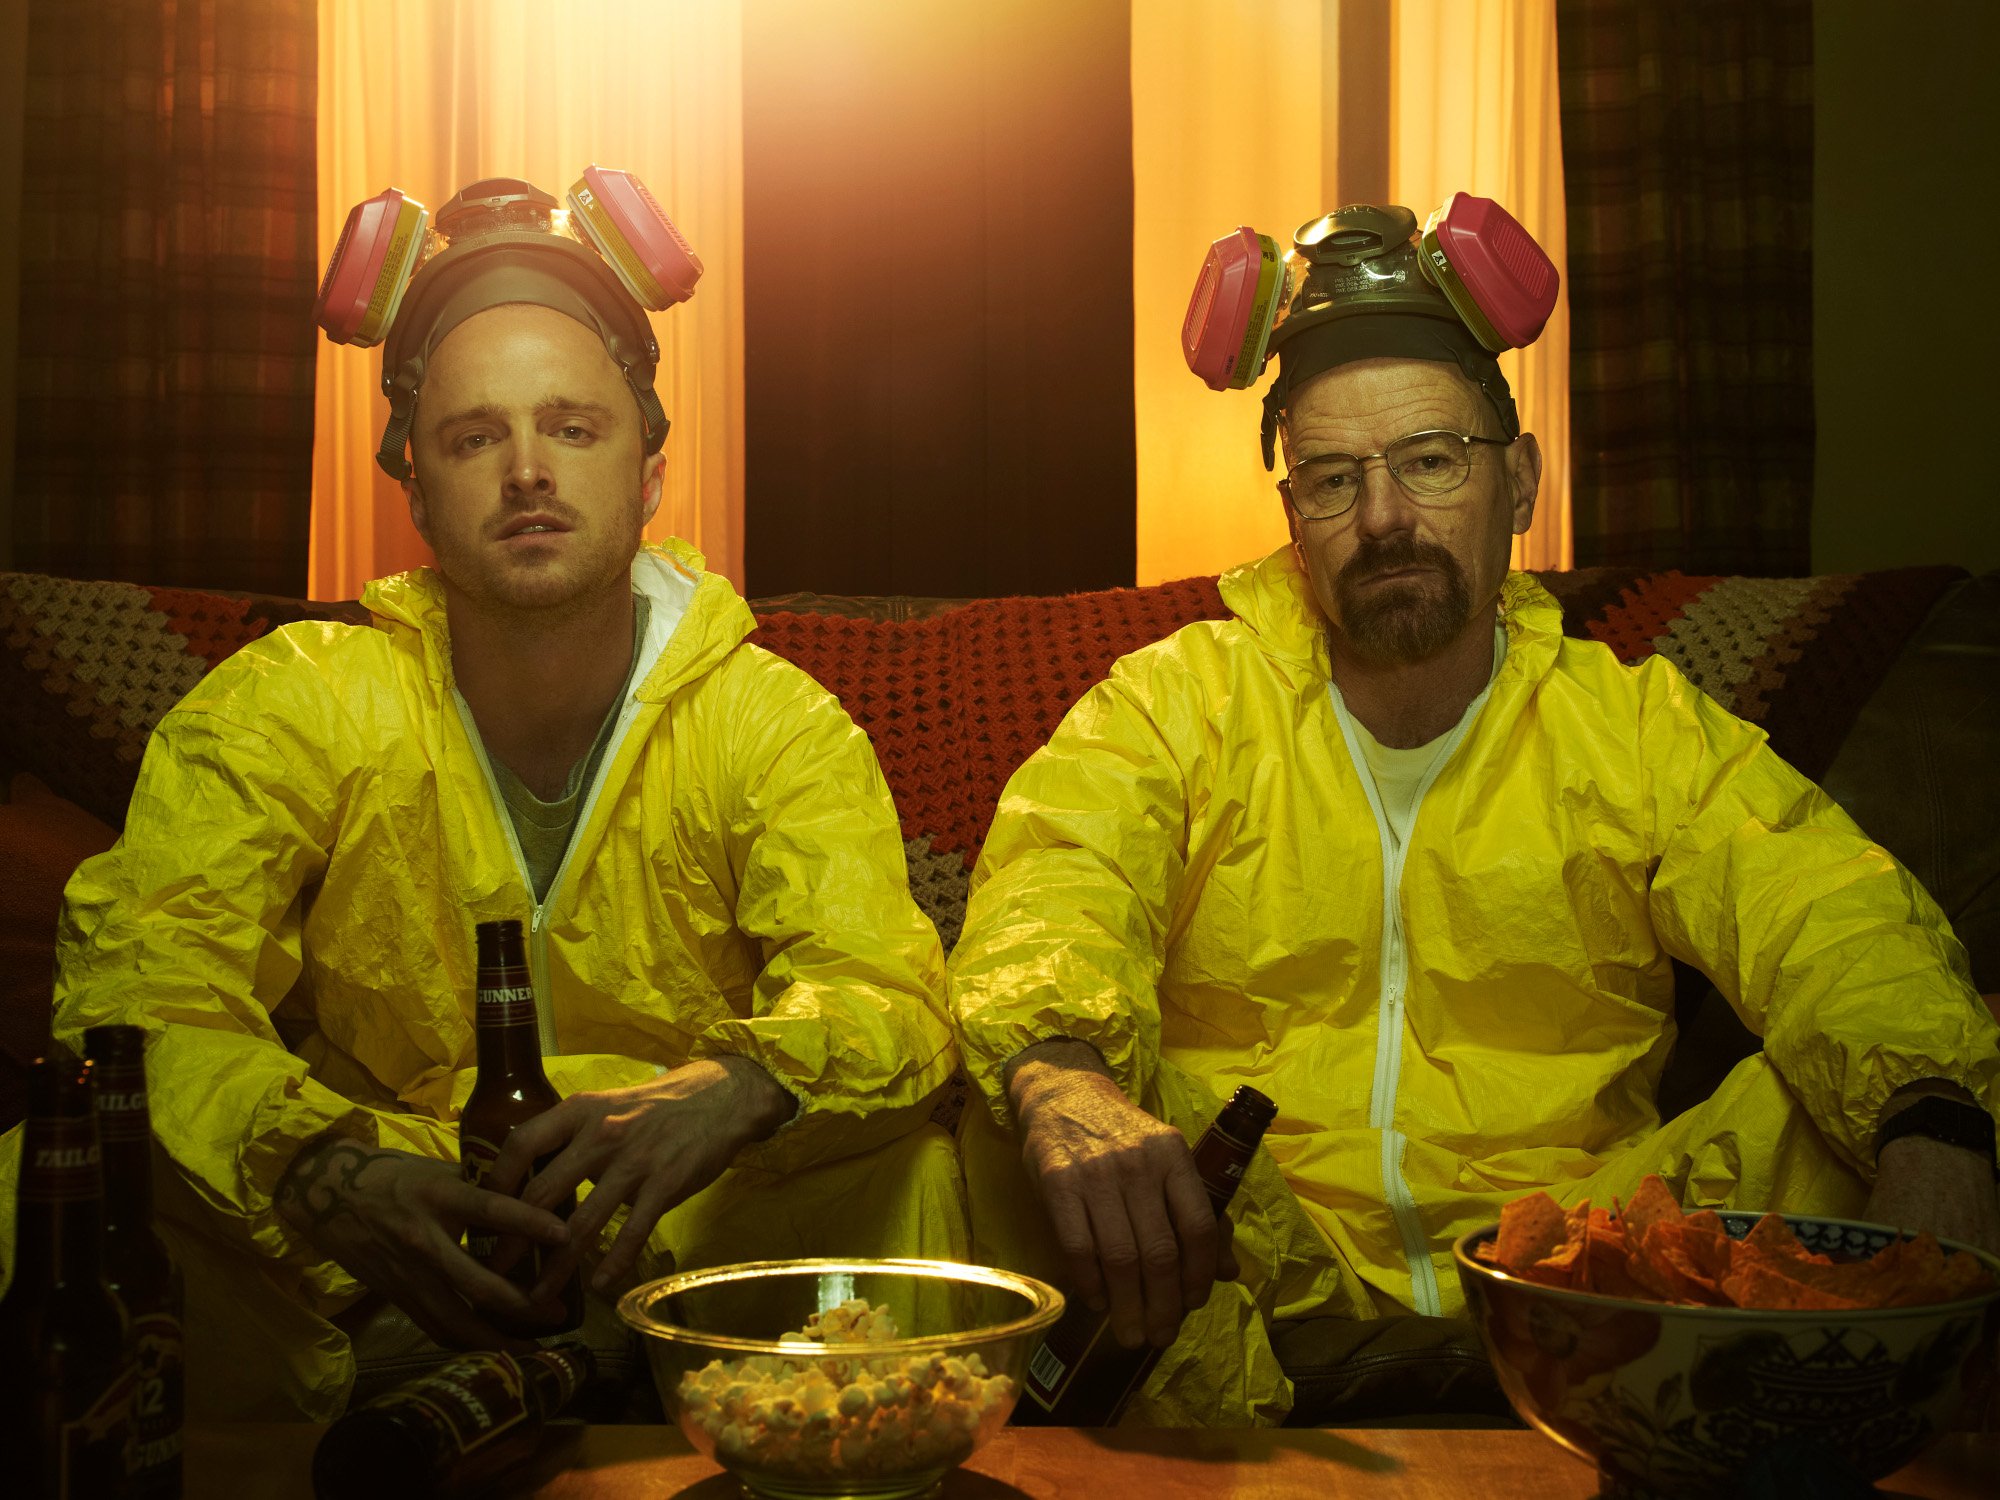 Aaron Paul and Bryan Cranston as Jesse and Walt, both of whom will return in 'Better Call Saul' Season 6 Part 2. They're wearing yellow lab suits and gas masks and sitting on a couch.